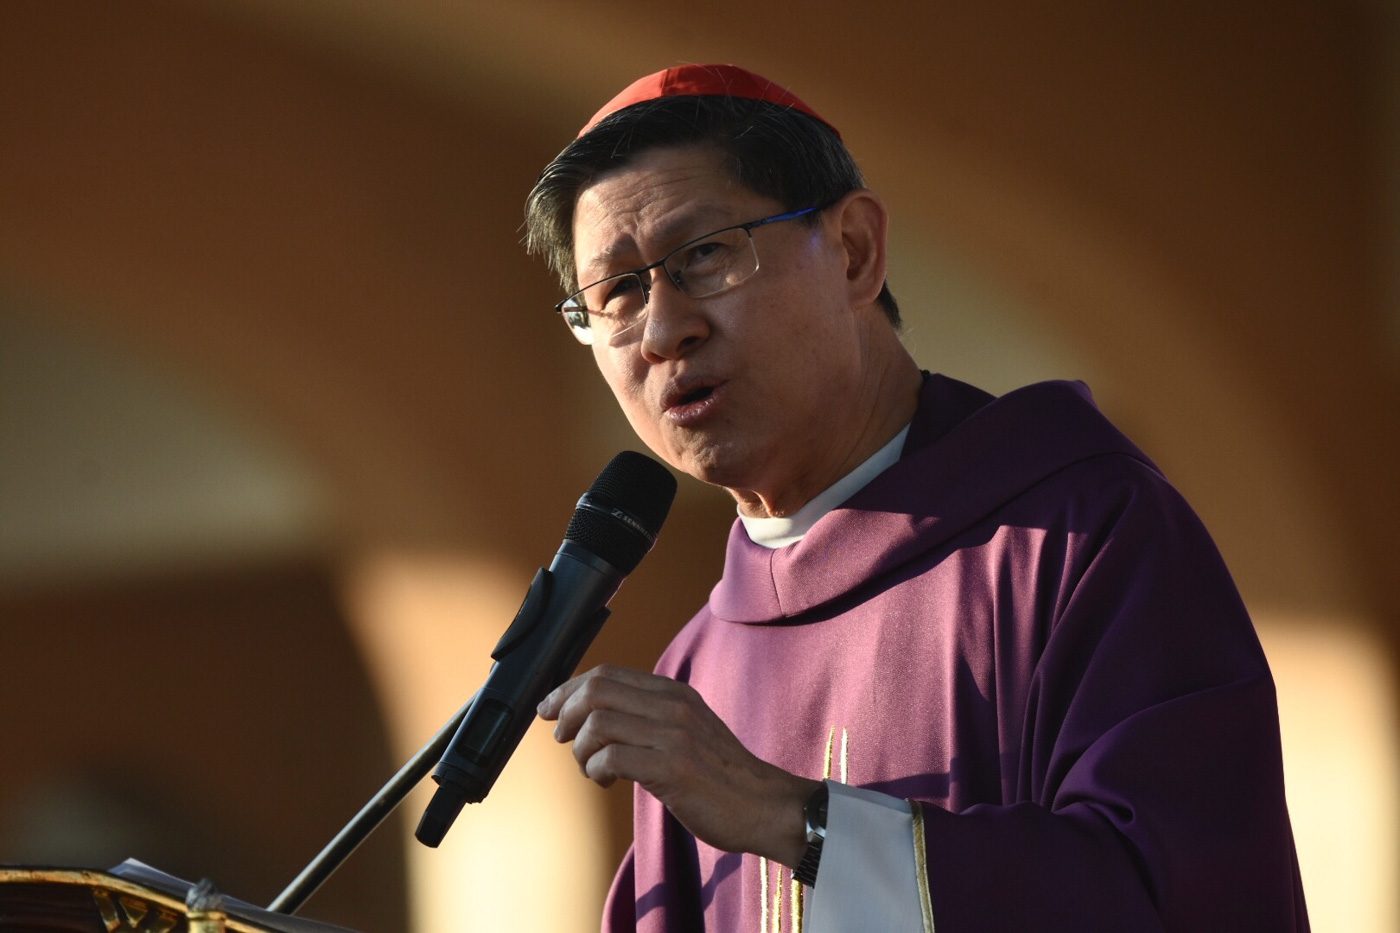 Treat people as gifts, not commodities – Cardinal Tagle